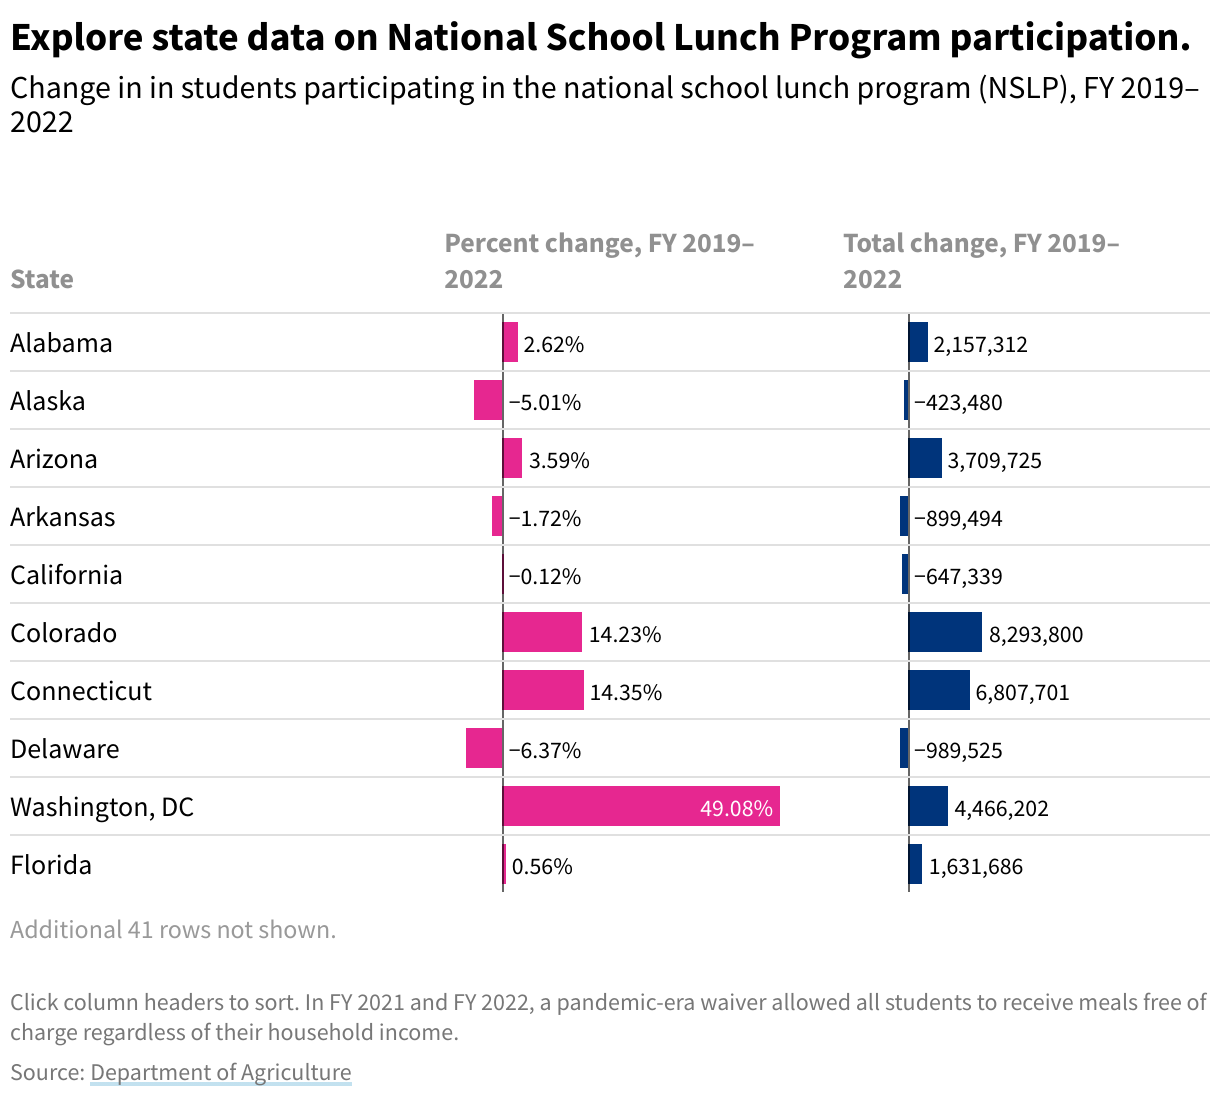 Table showing change in in students participating in the national school lunch program, from fiscal year 2019 to 2022